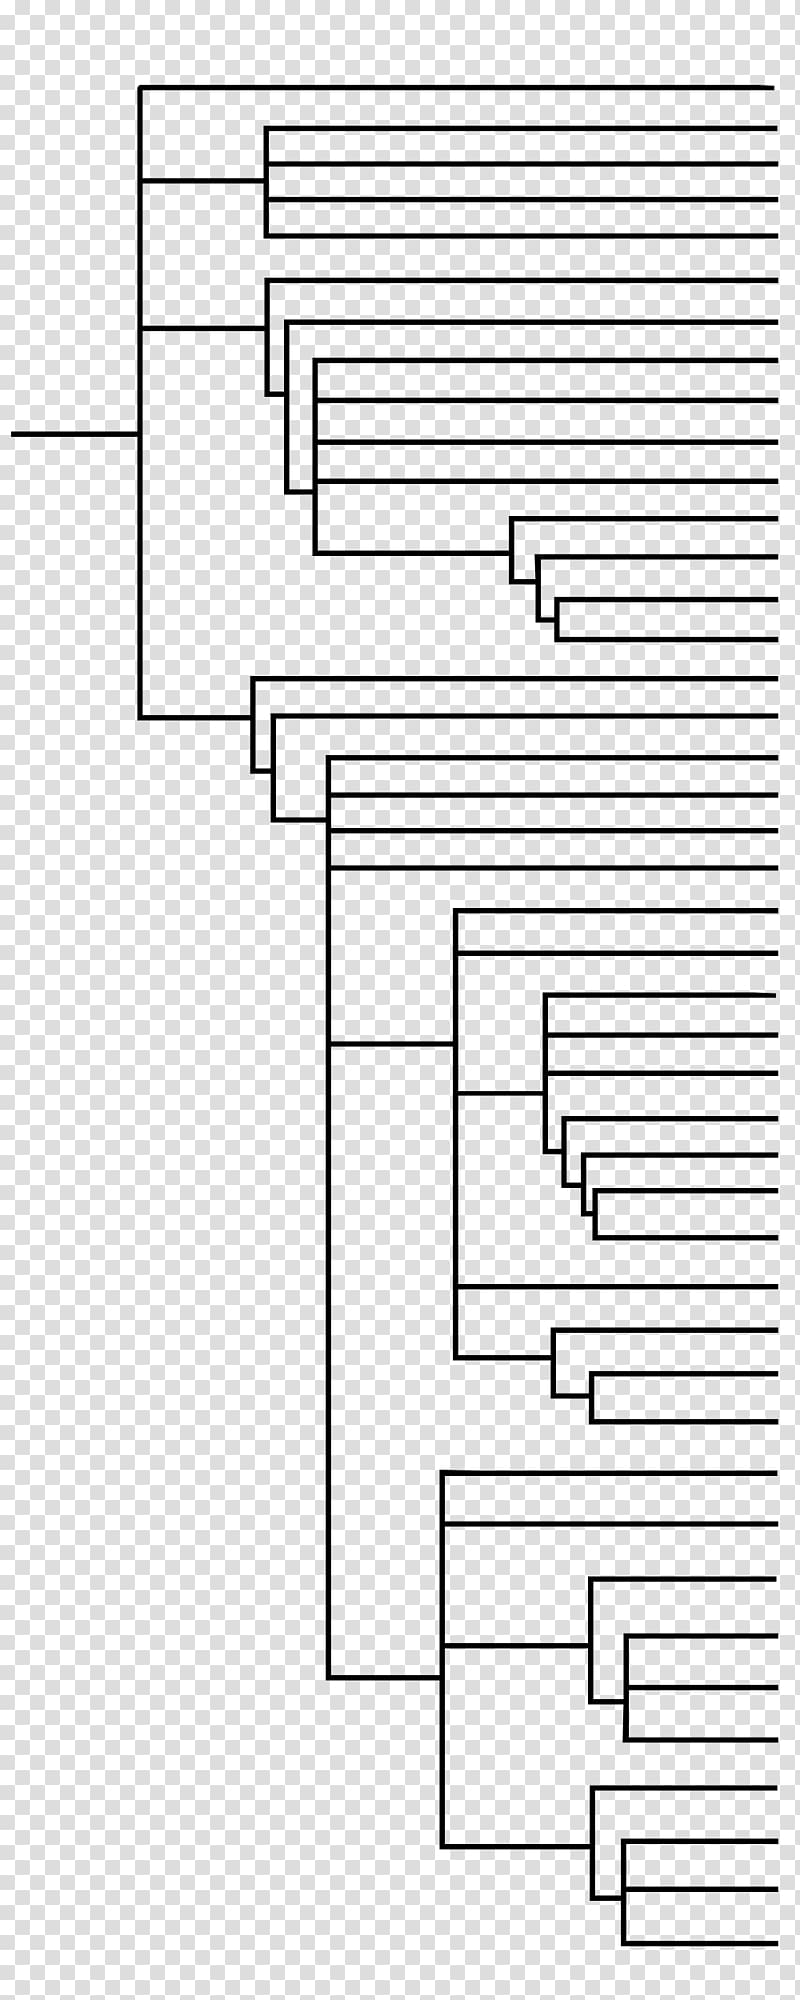 APG II system APG system Angiosperm Phylogeny Group APG III system Cladogram, others transparent background PNG clipart